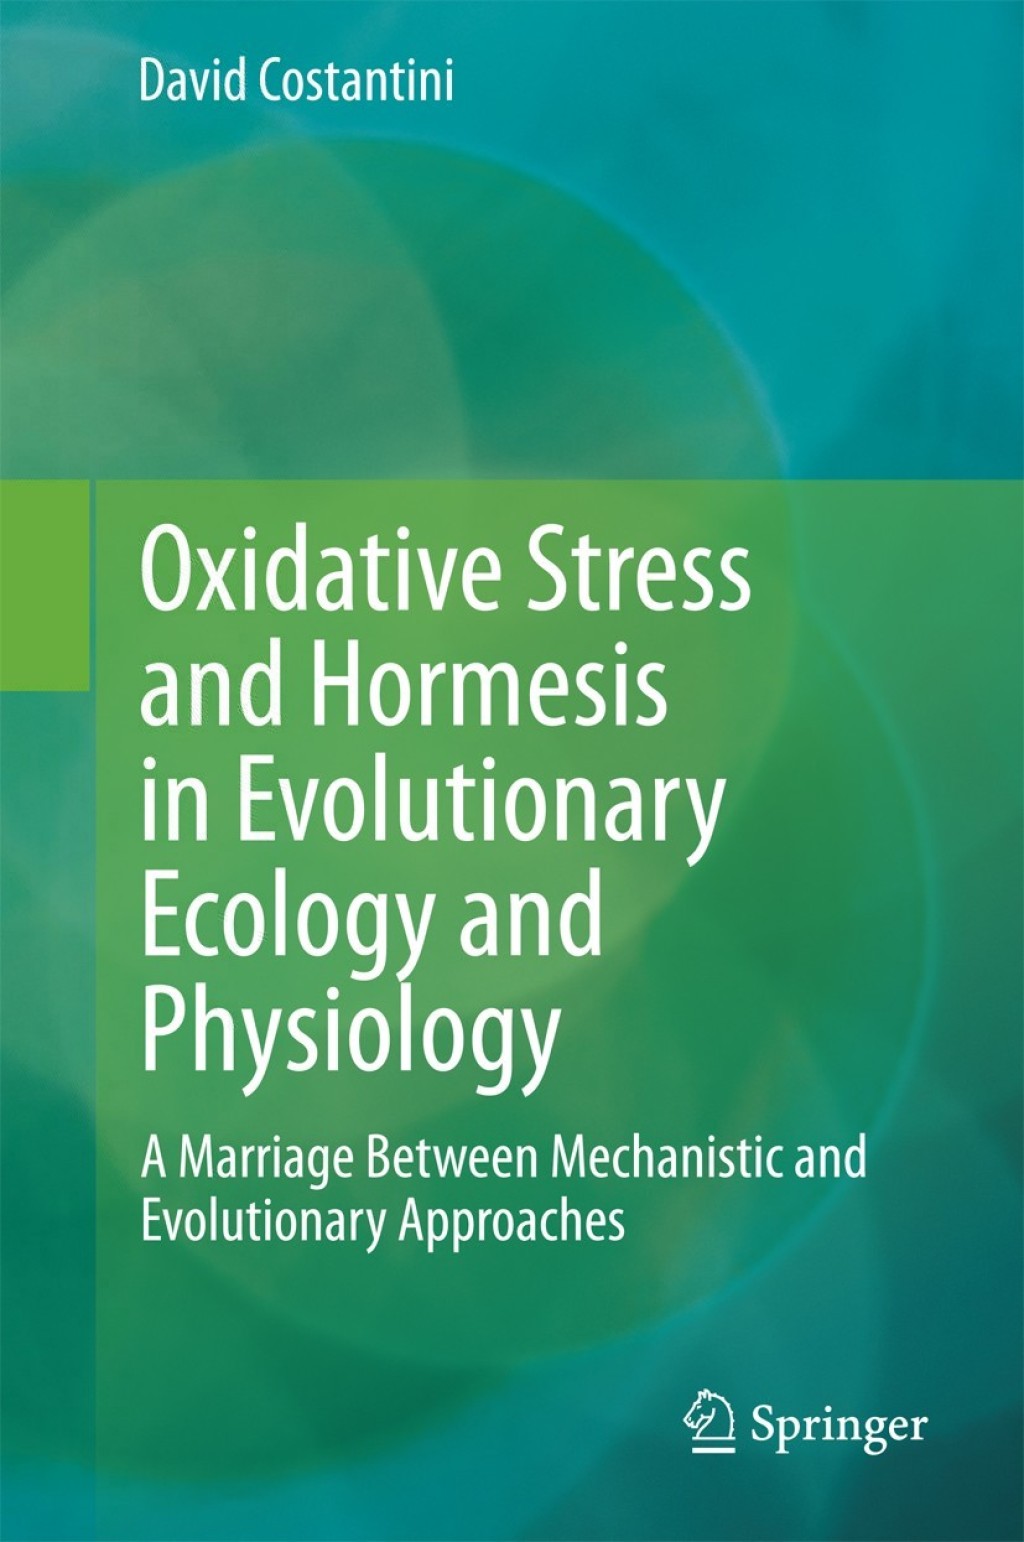 Oxidative Stress and Hormesis in Evolutionary Ecology and Physiology (eBook Rental) - David Costantini,